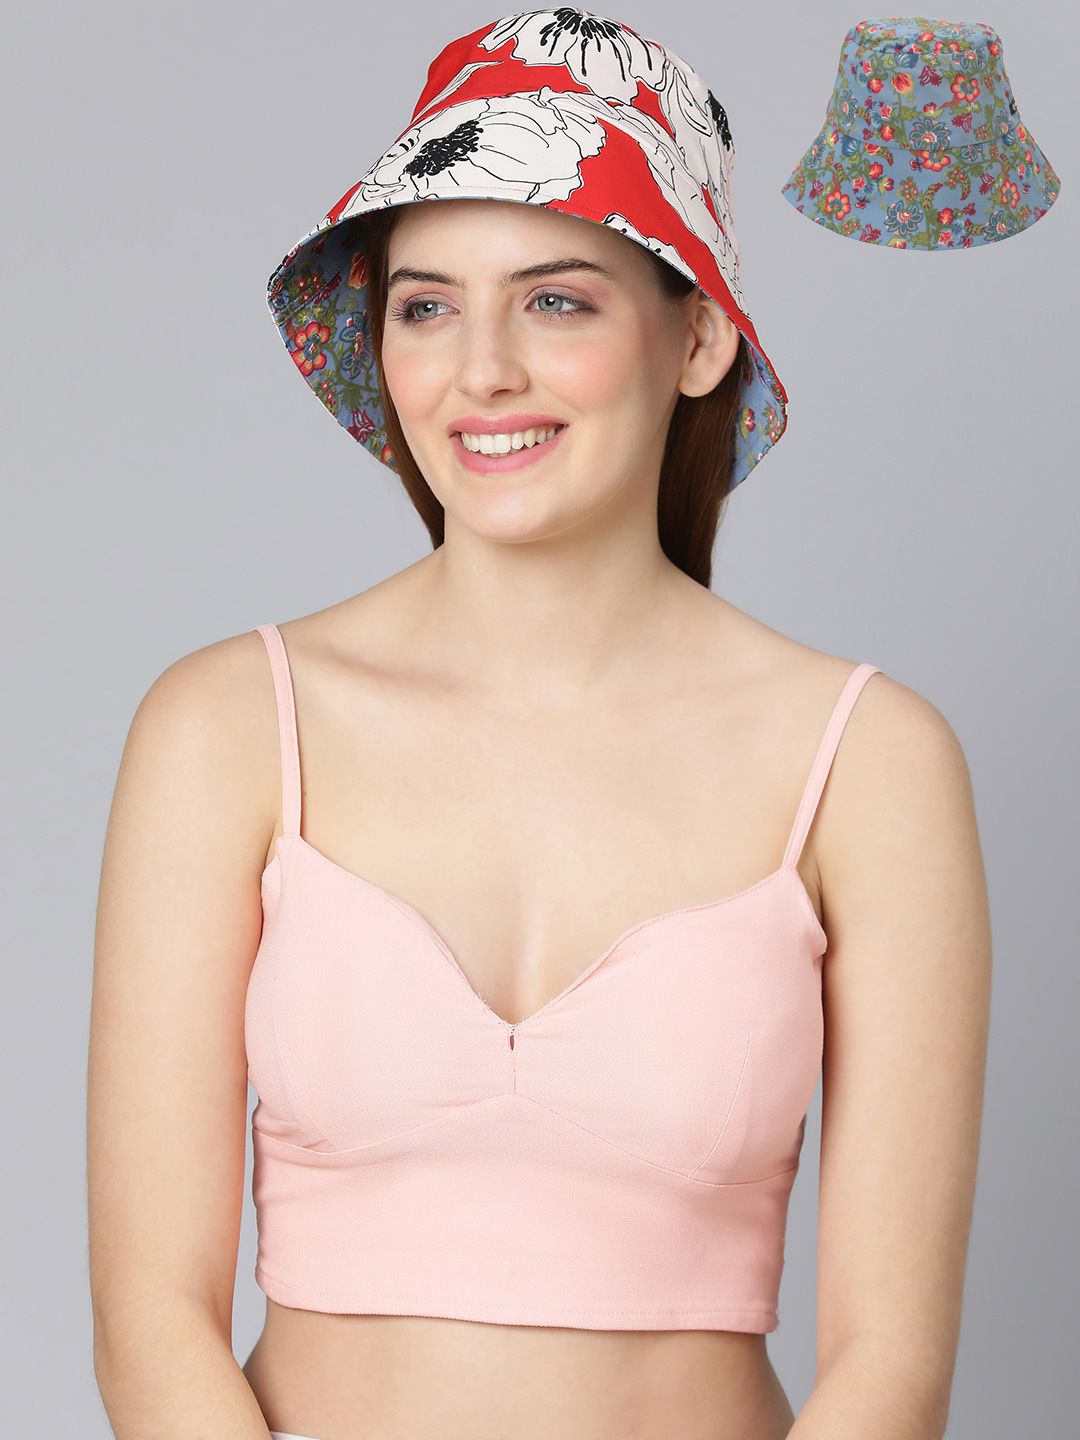 Oxolloxo Women Multi Colored Floral Printed Reversible Bucket Hat Price in India